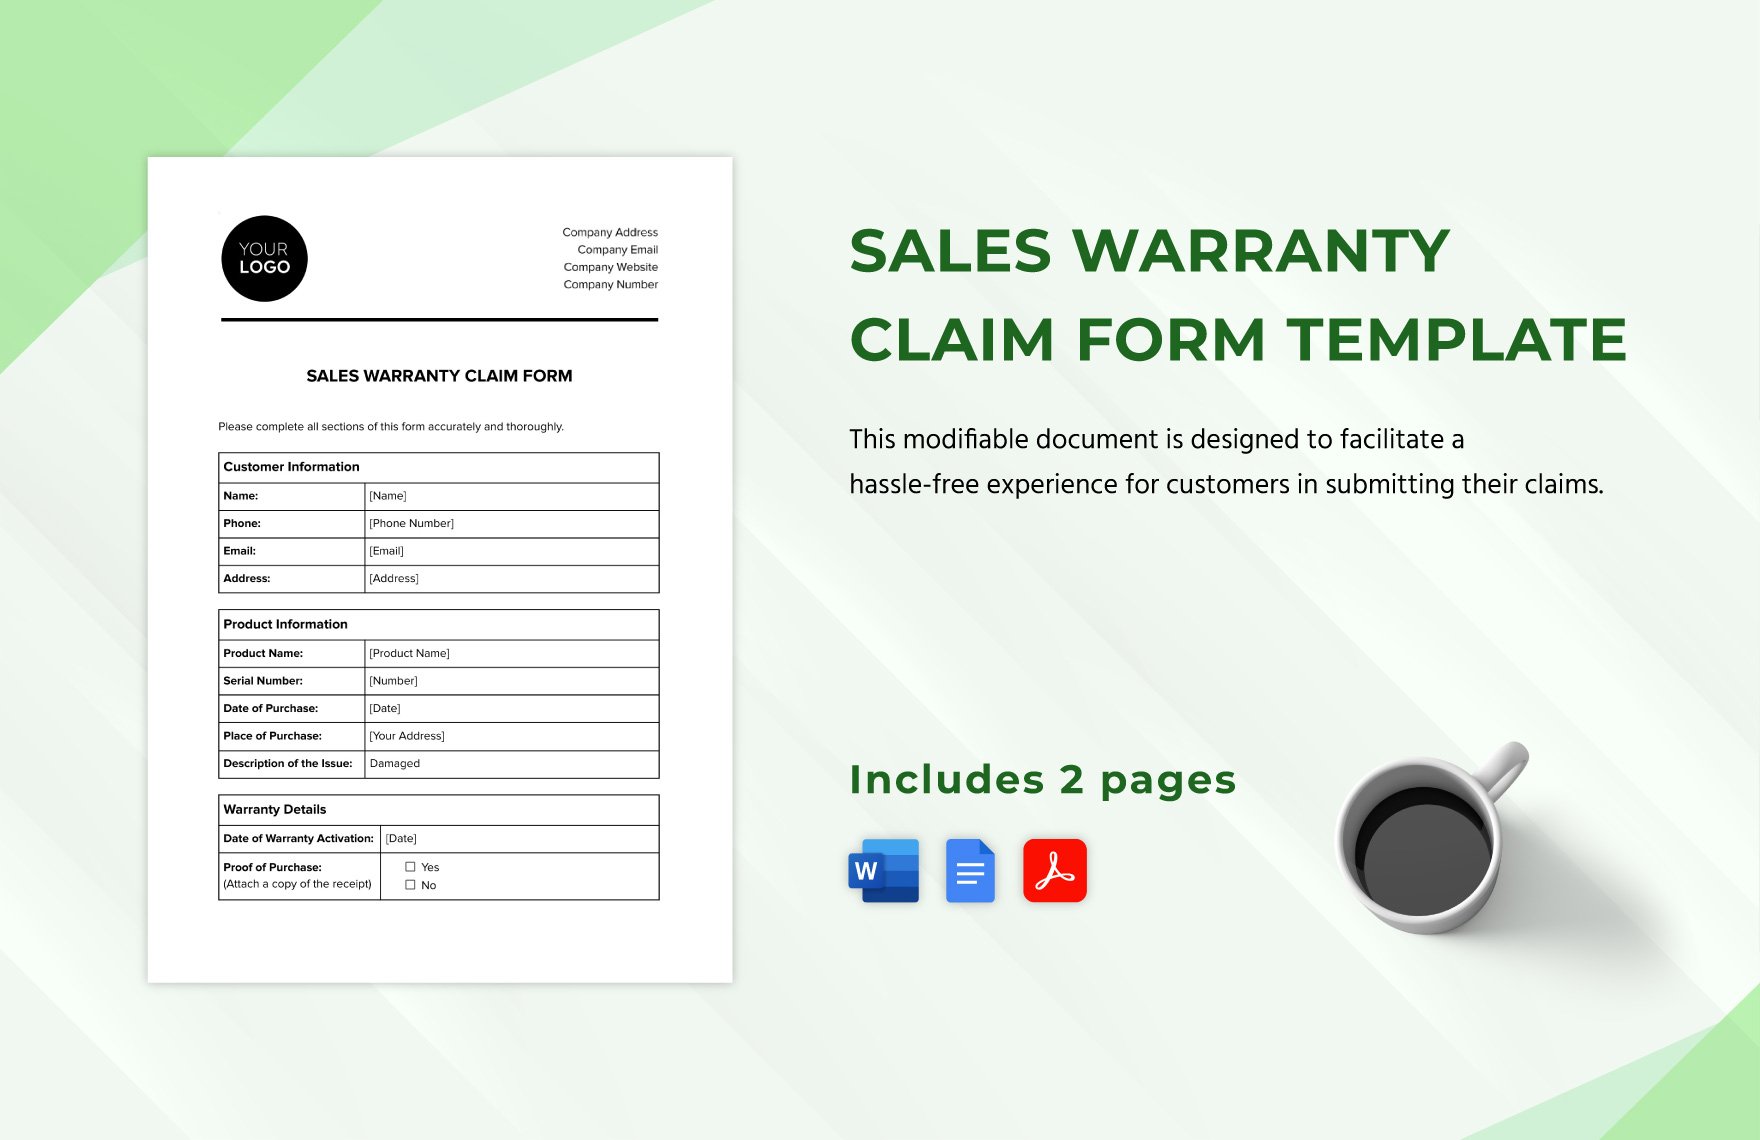 Sales Warranty Claim Form Template in Word, PDF, Google Docs - Download ...